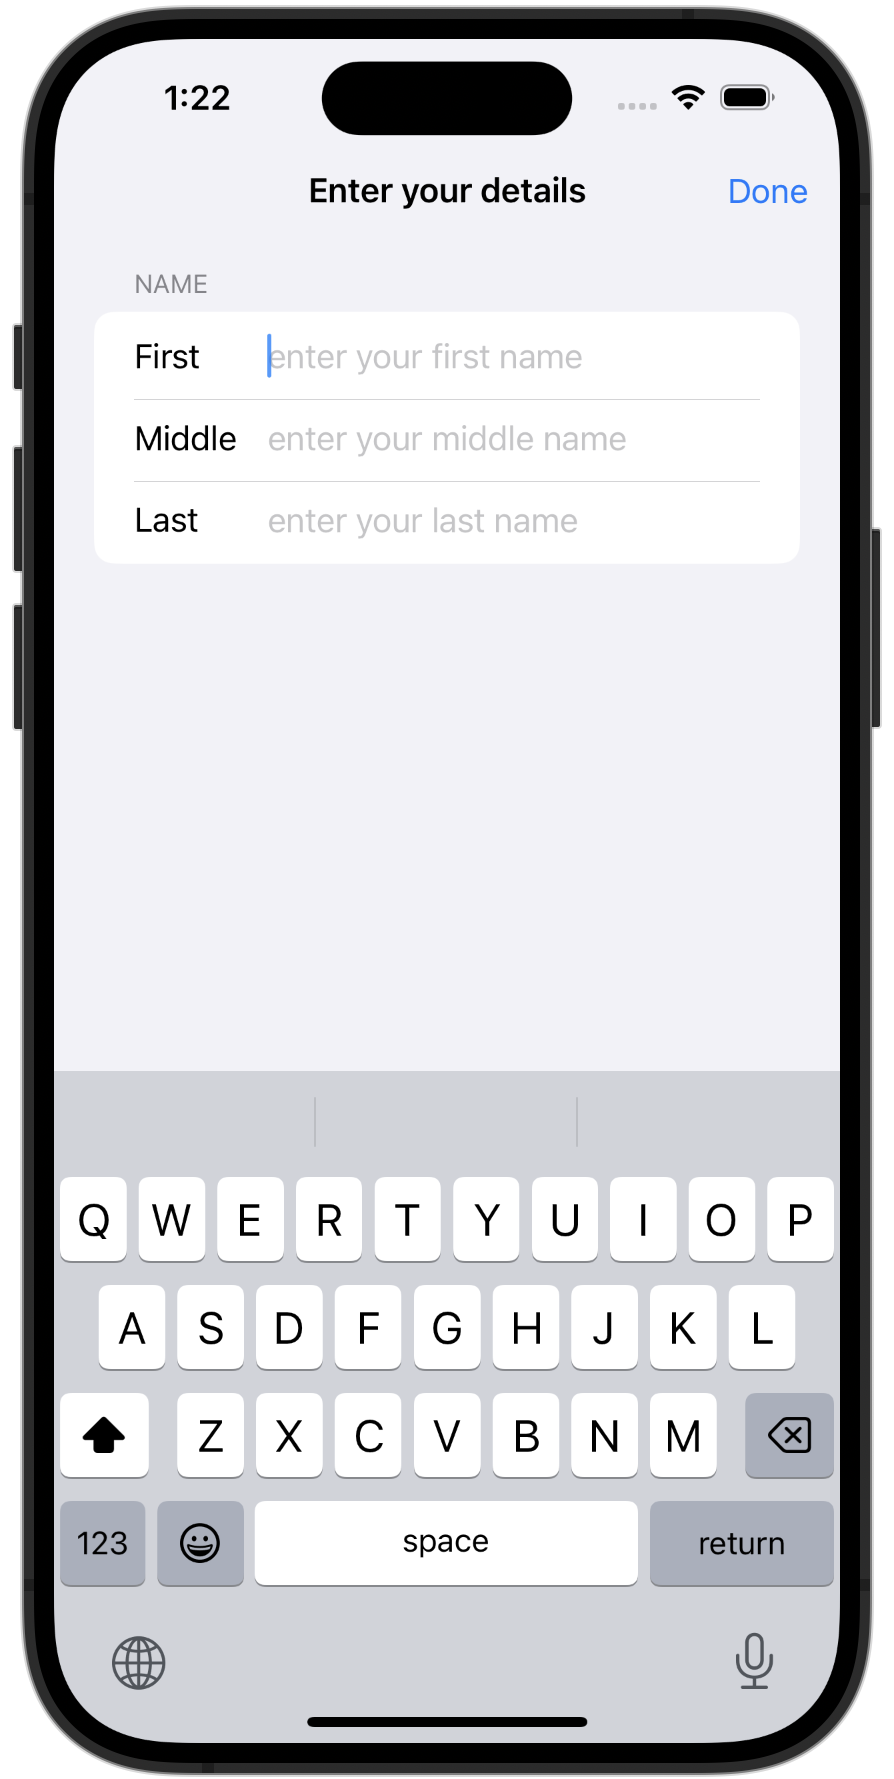 Three text fields to input your first, middle and last name.